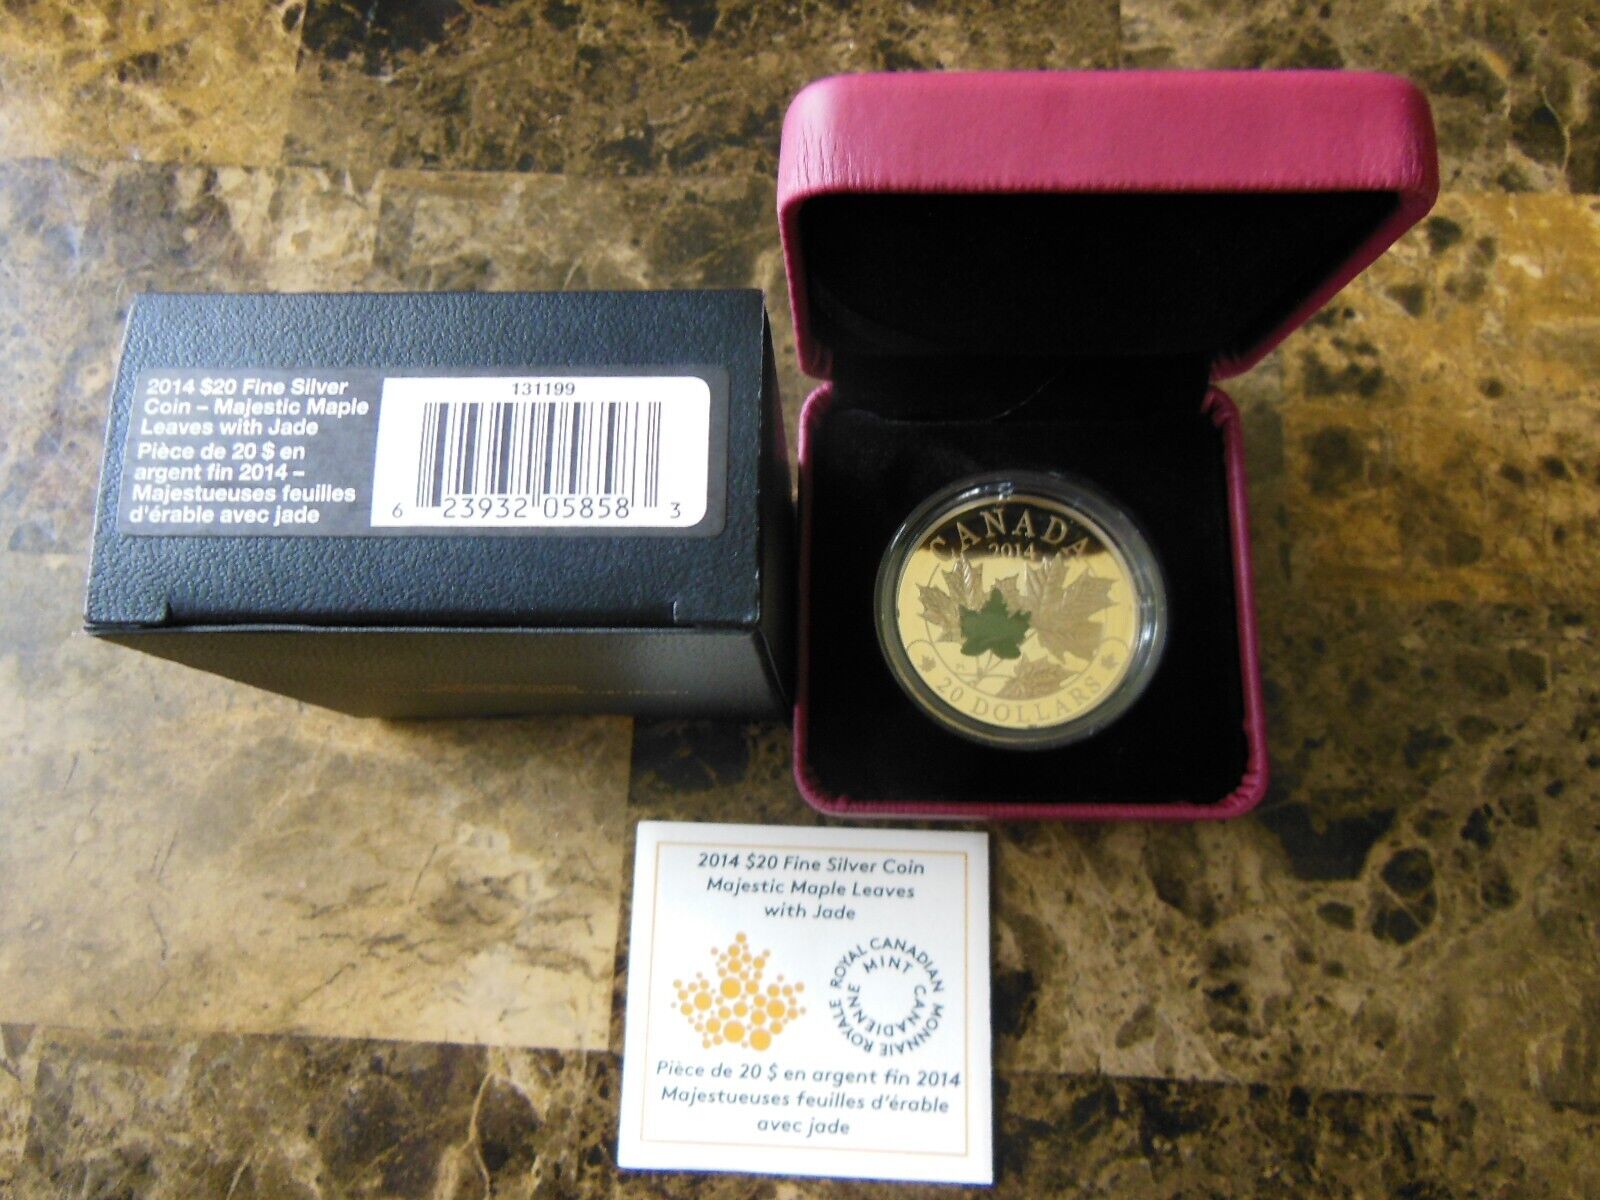 2014 CANADA $20 PURE SILVER PROOF 1 OZ. COIN - Majestic Maple Leaves with jade!